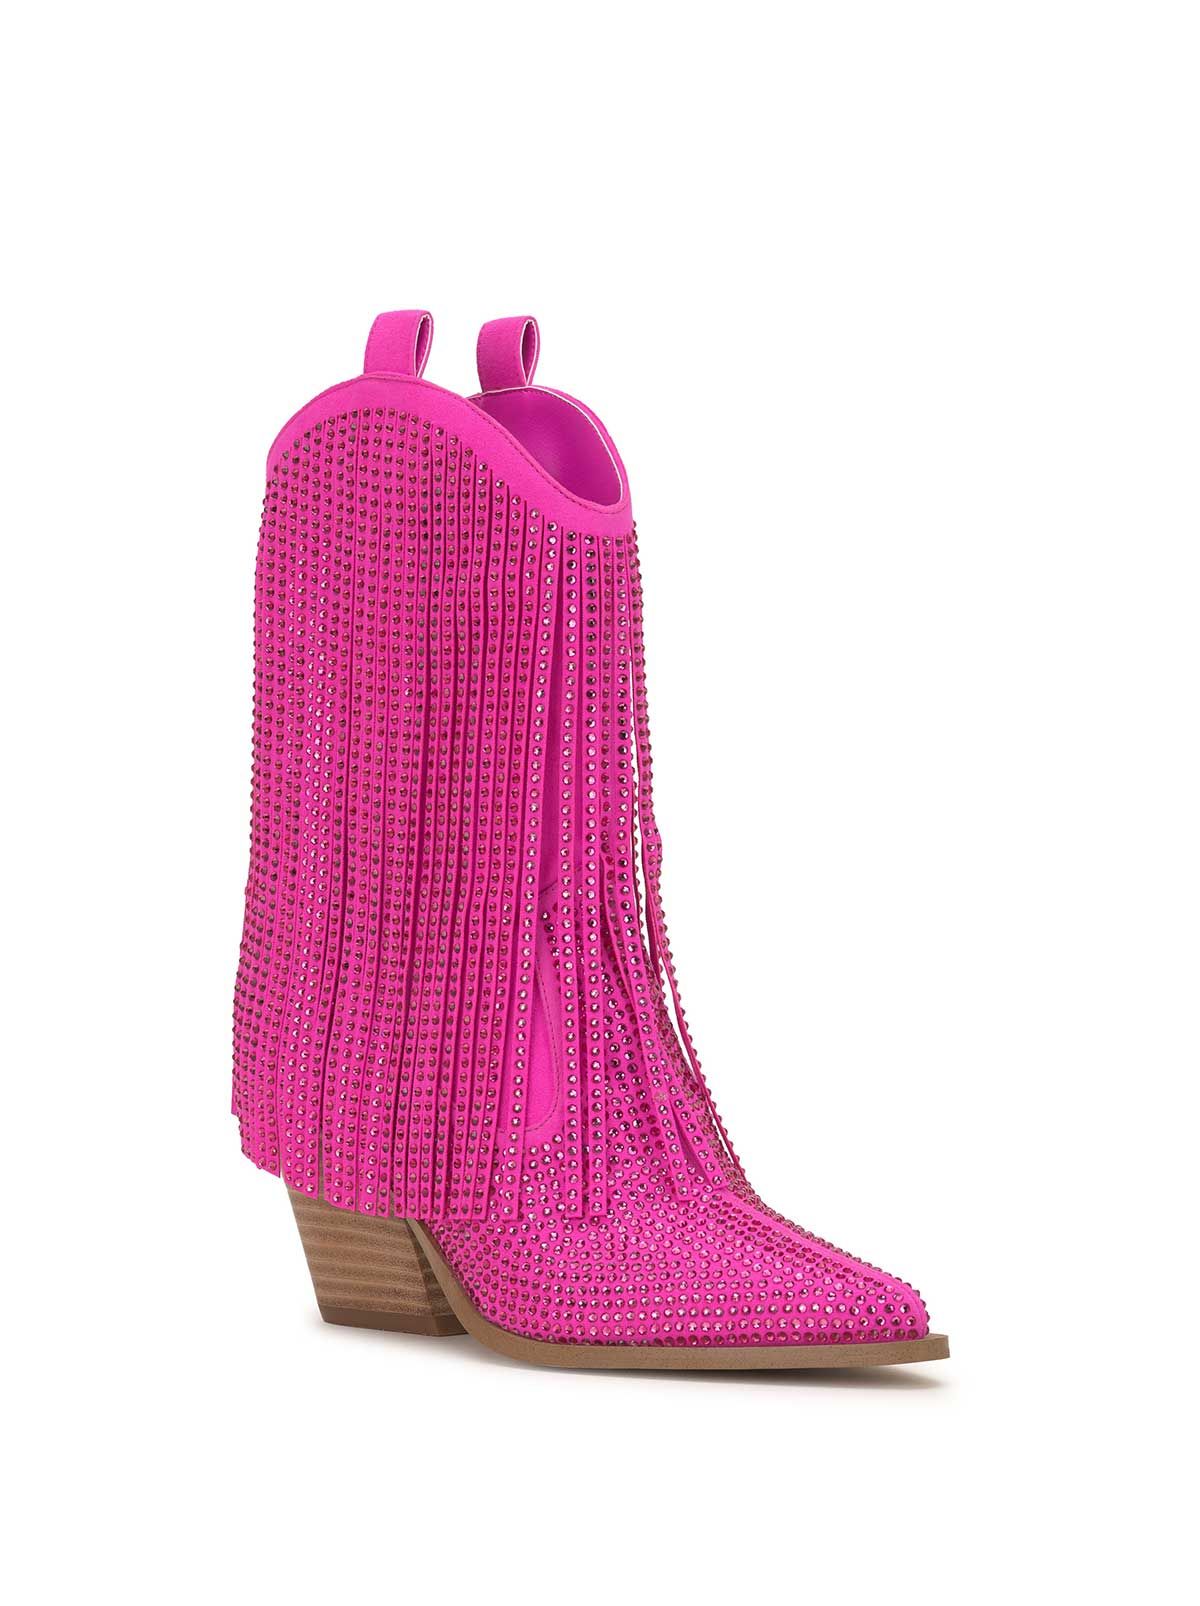 Paredisa Fringe Bootie in Valley Pink | Jessica Simpson E Commerce